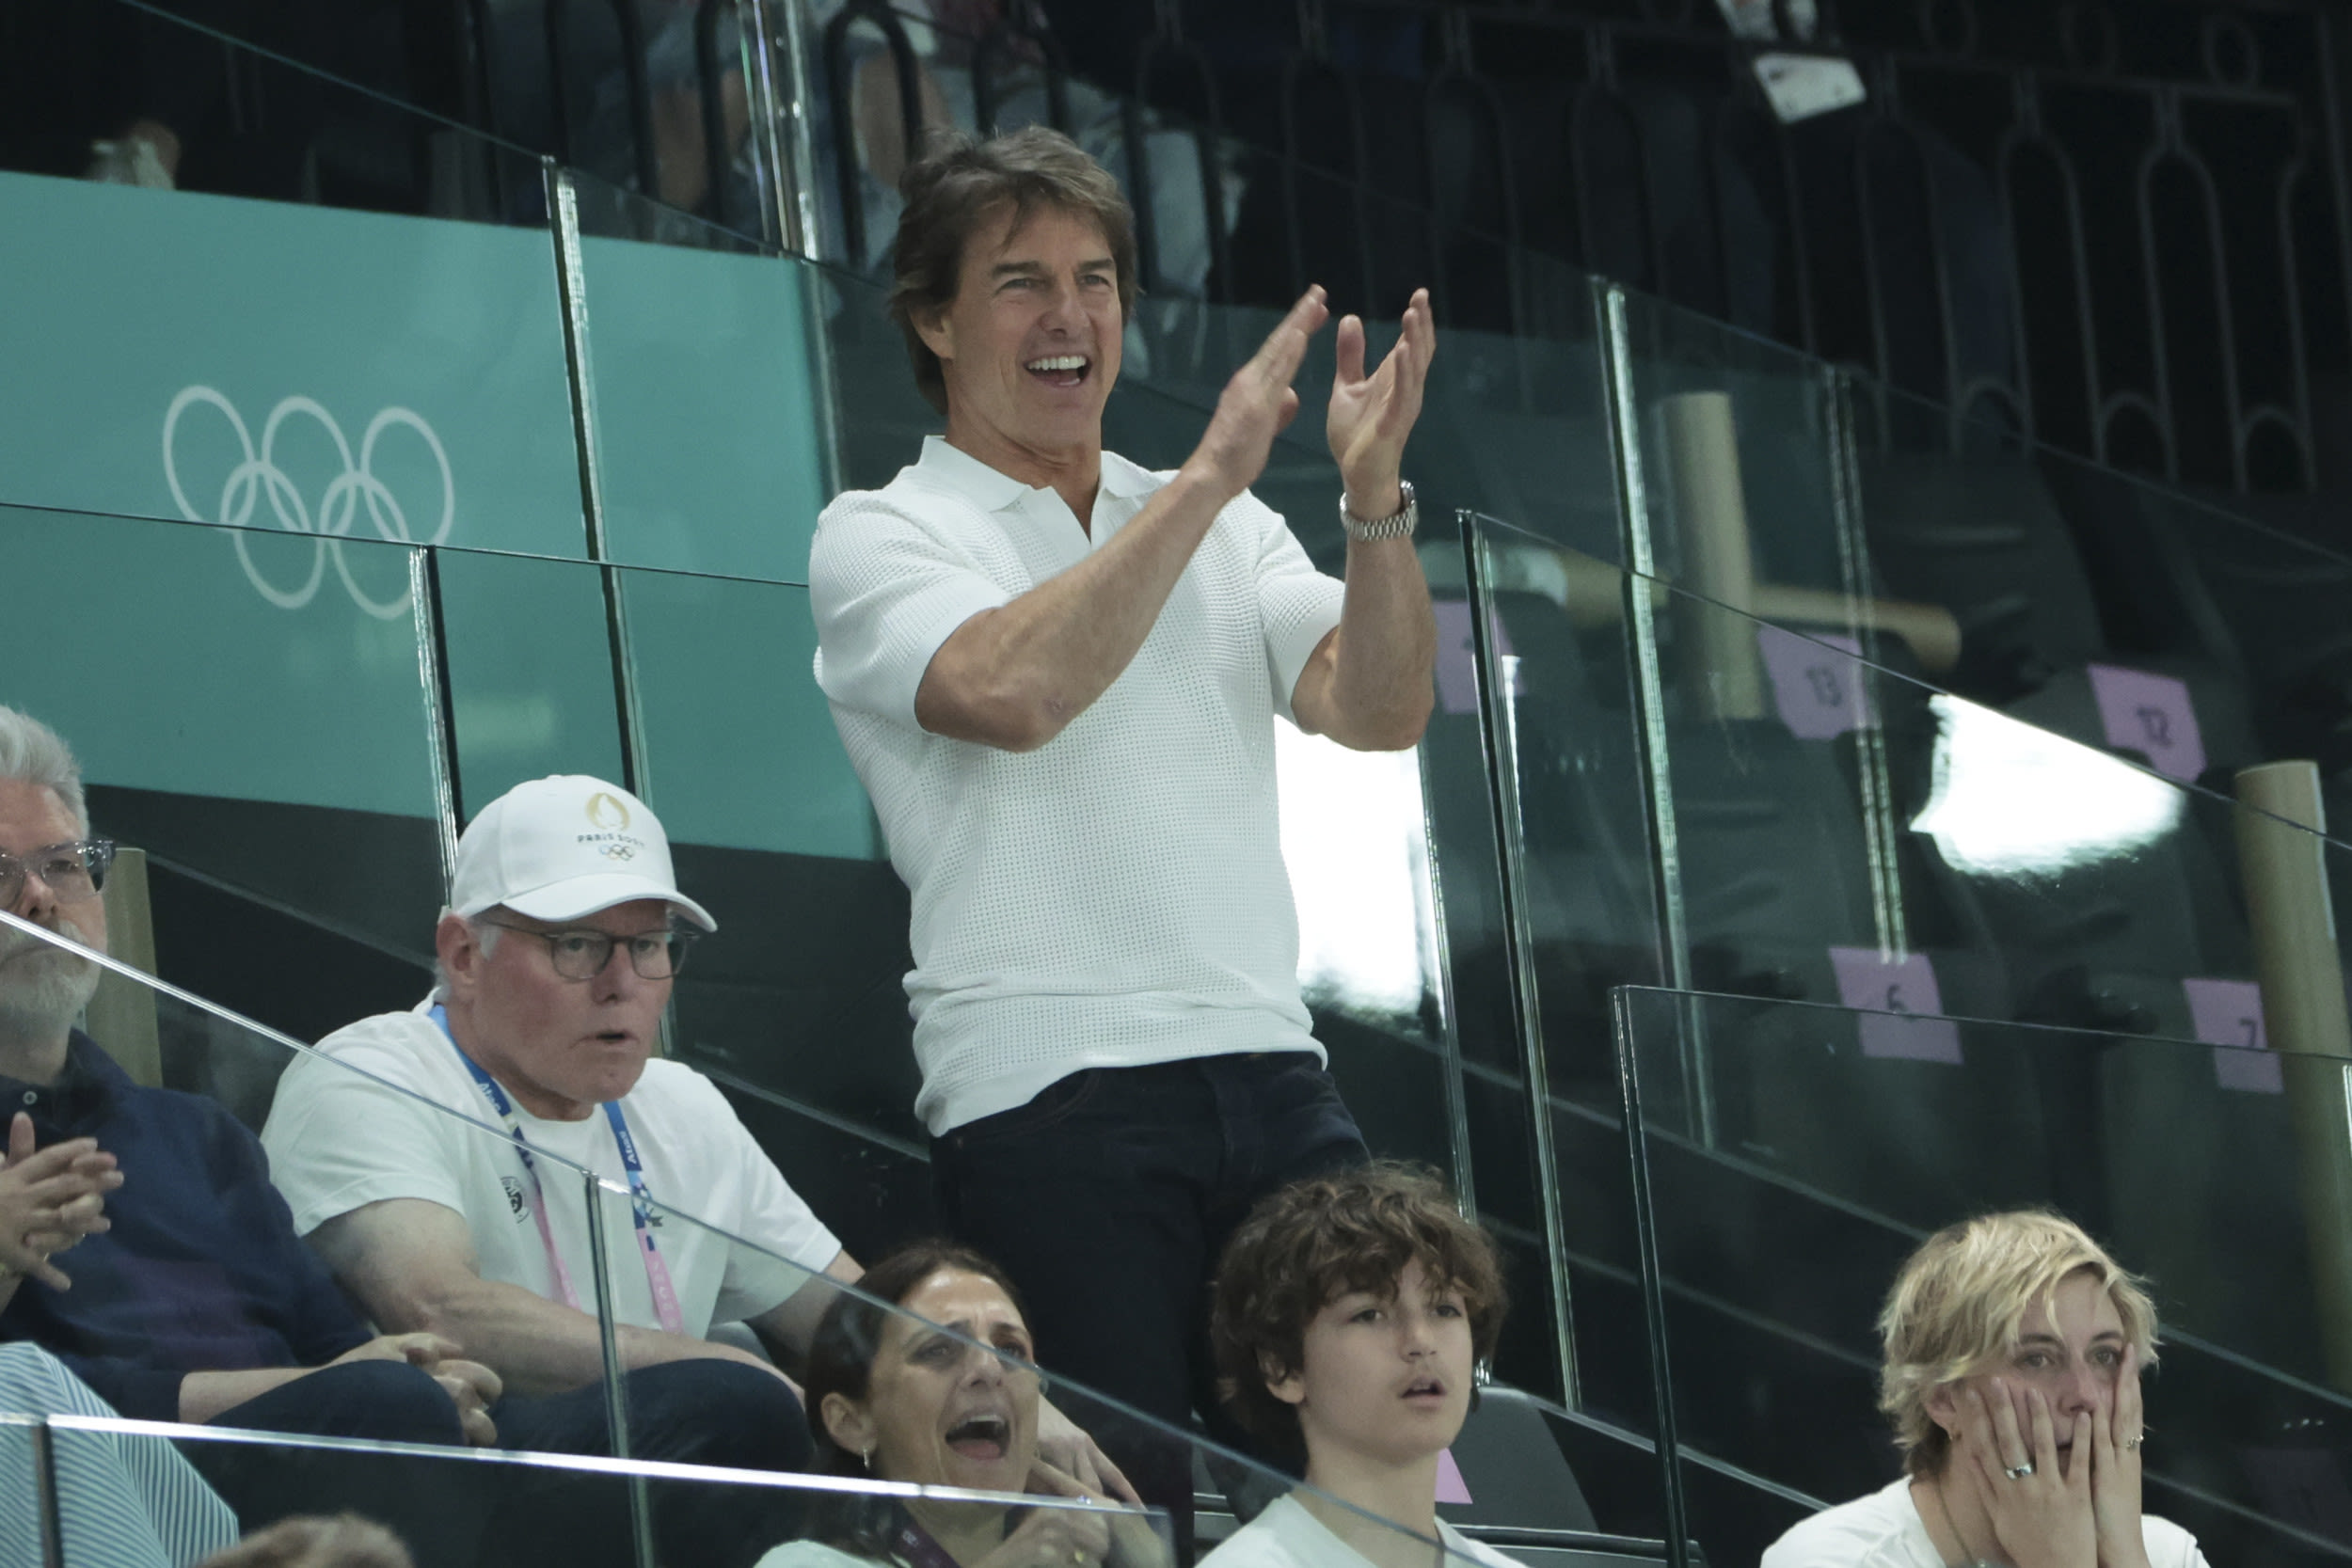 Tom Cruise's Olympics closing ceremony stunt: What we know